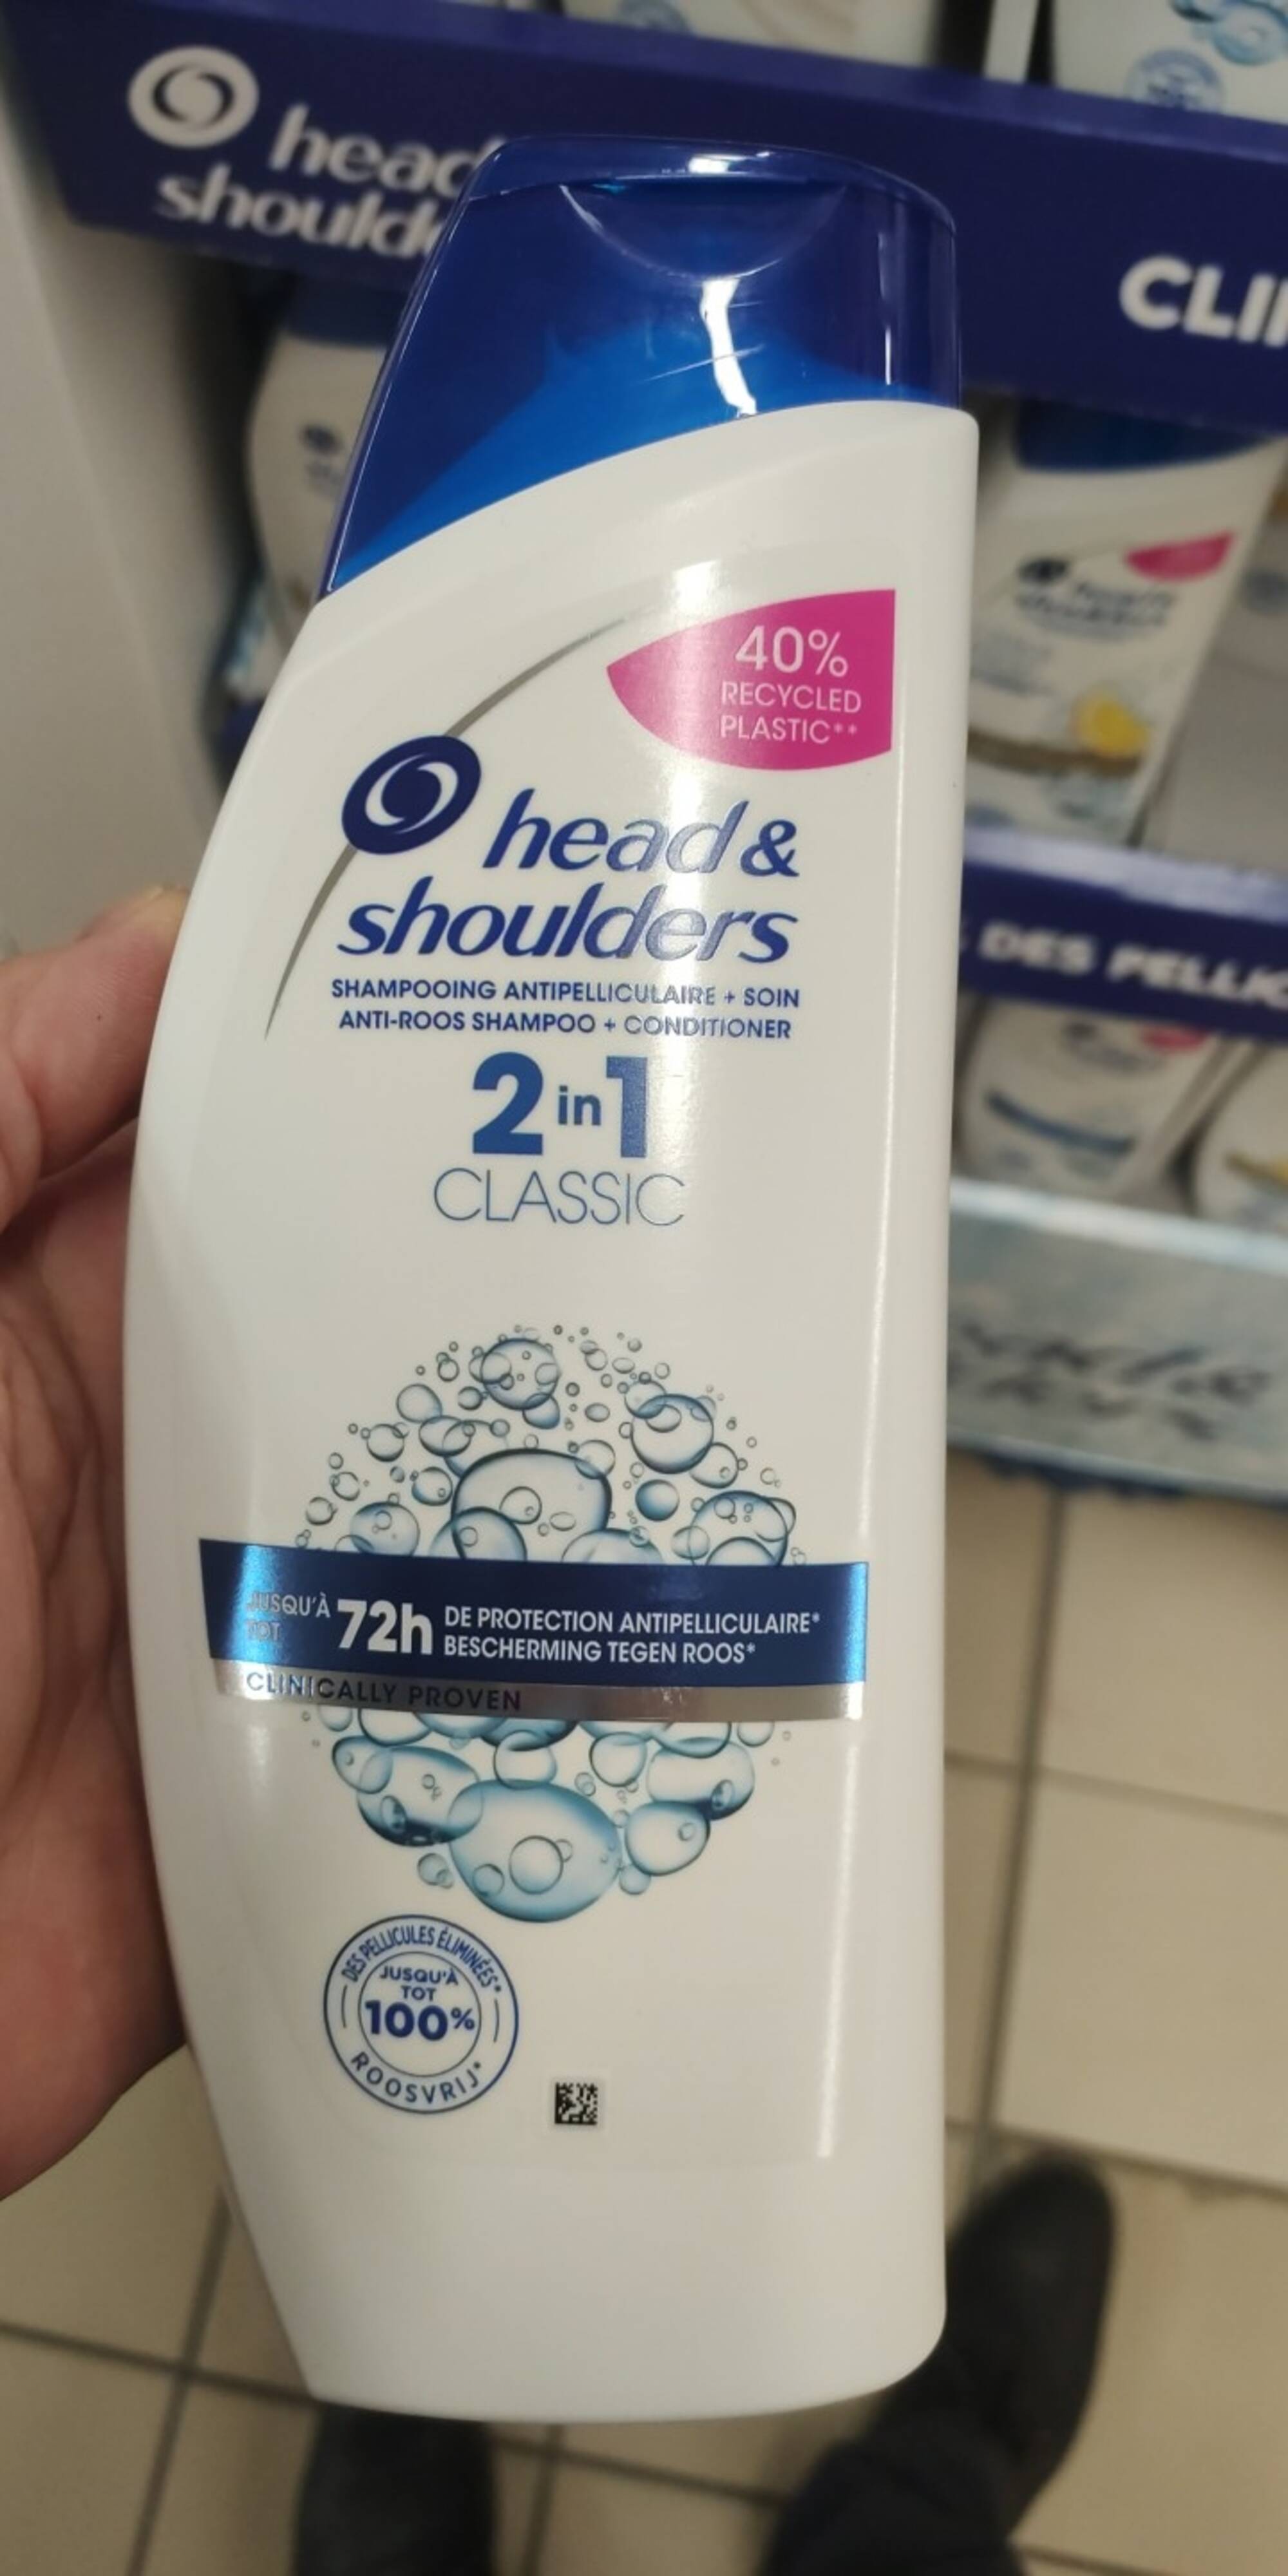 HEAD & SHOULDERS - 2 in 1 classic - Shampooing antipelliculaire + soin 